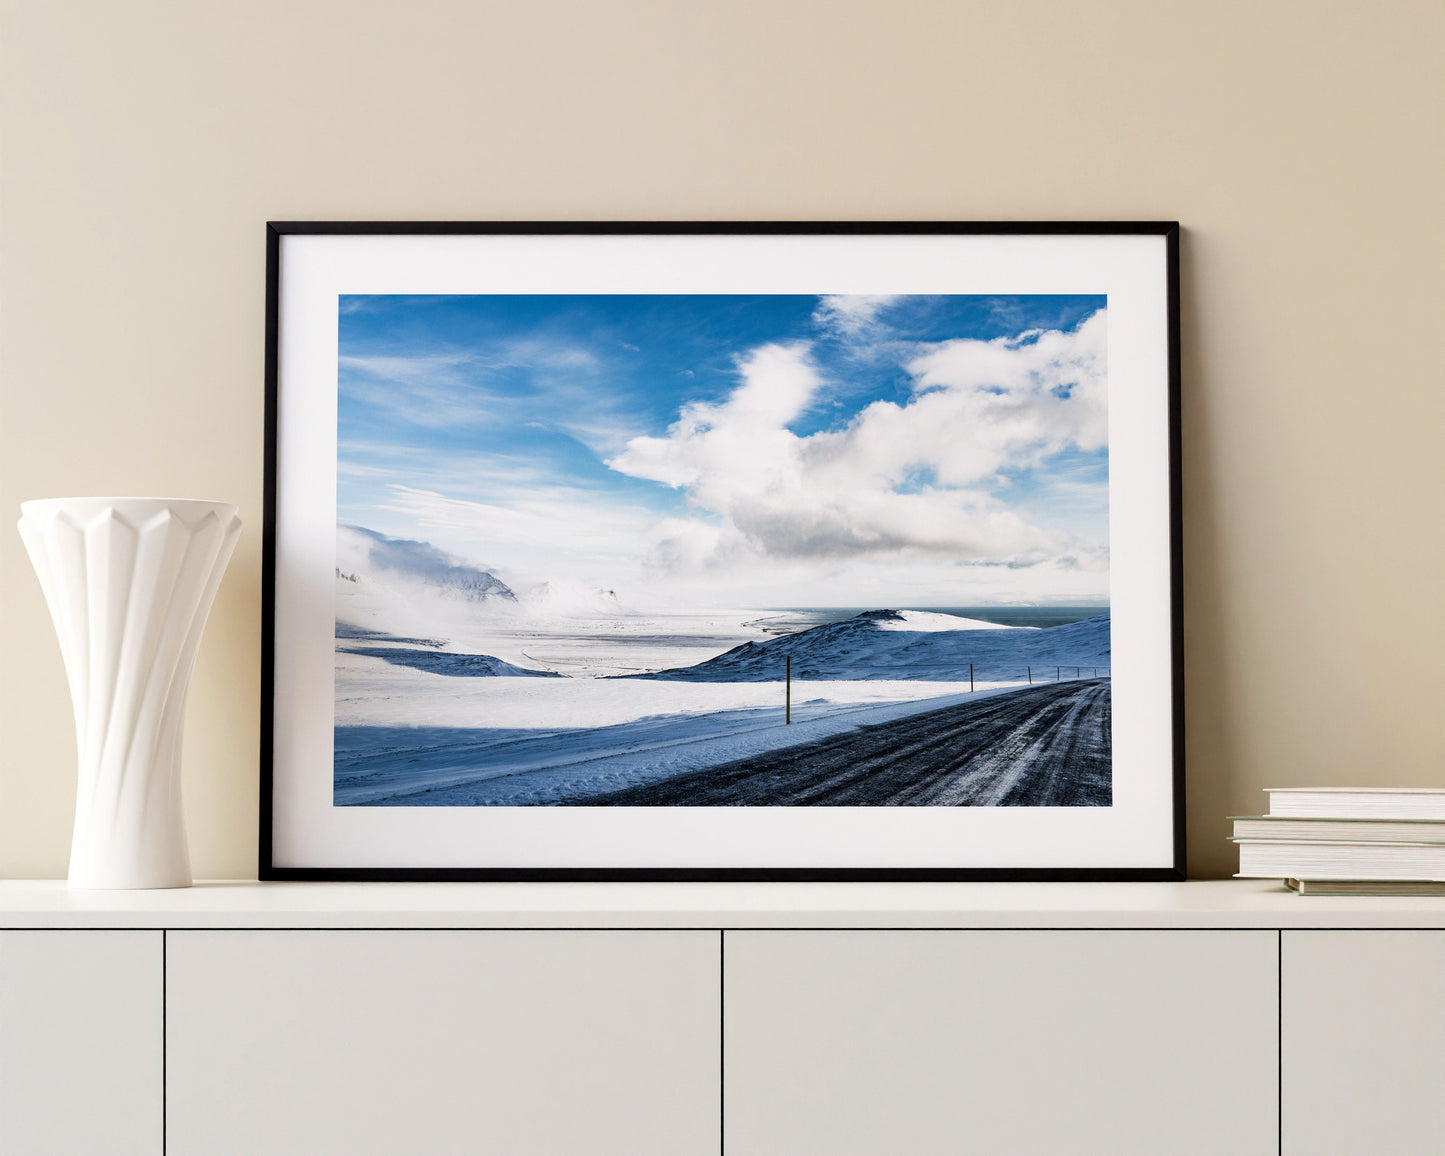 Mountain Landscape Print - Iceland Photography Print - Iceland Wall Art - Iceland Poster - Landscape - Winter Landscape - Mountains - Gift